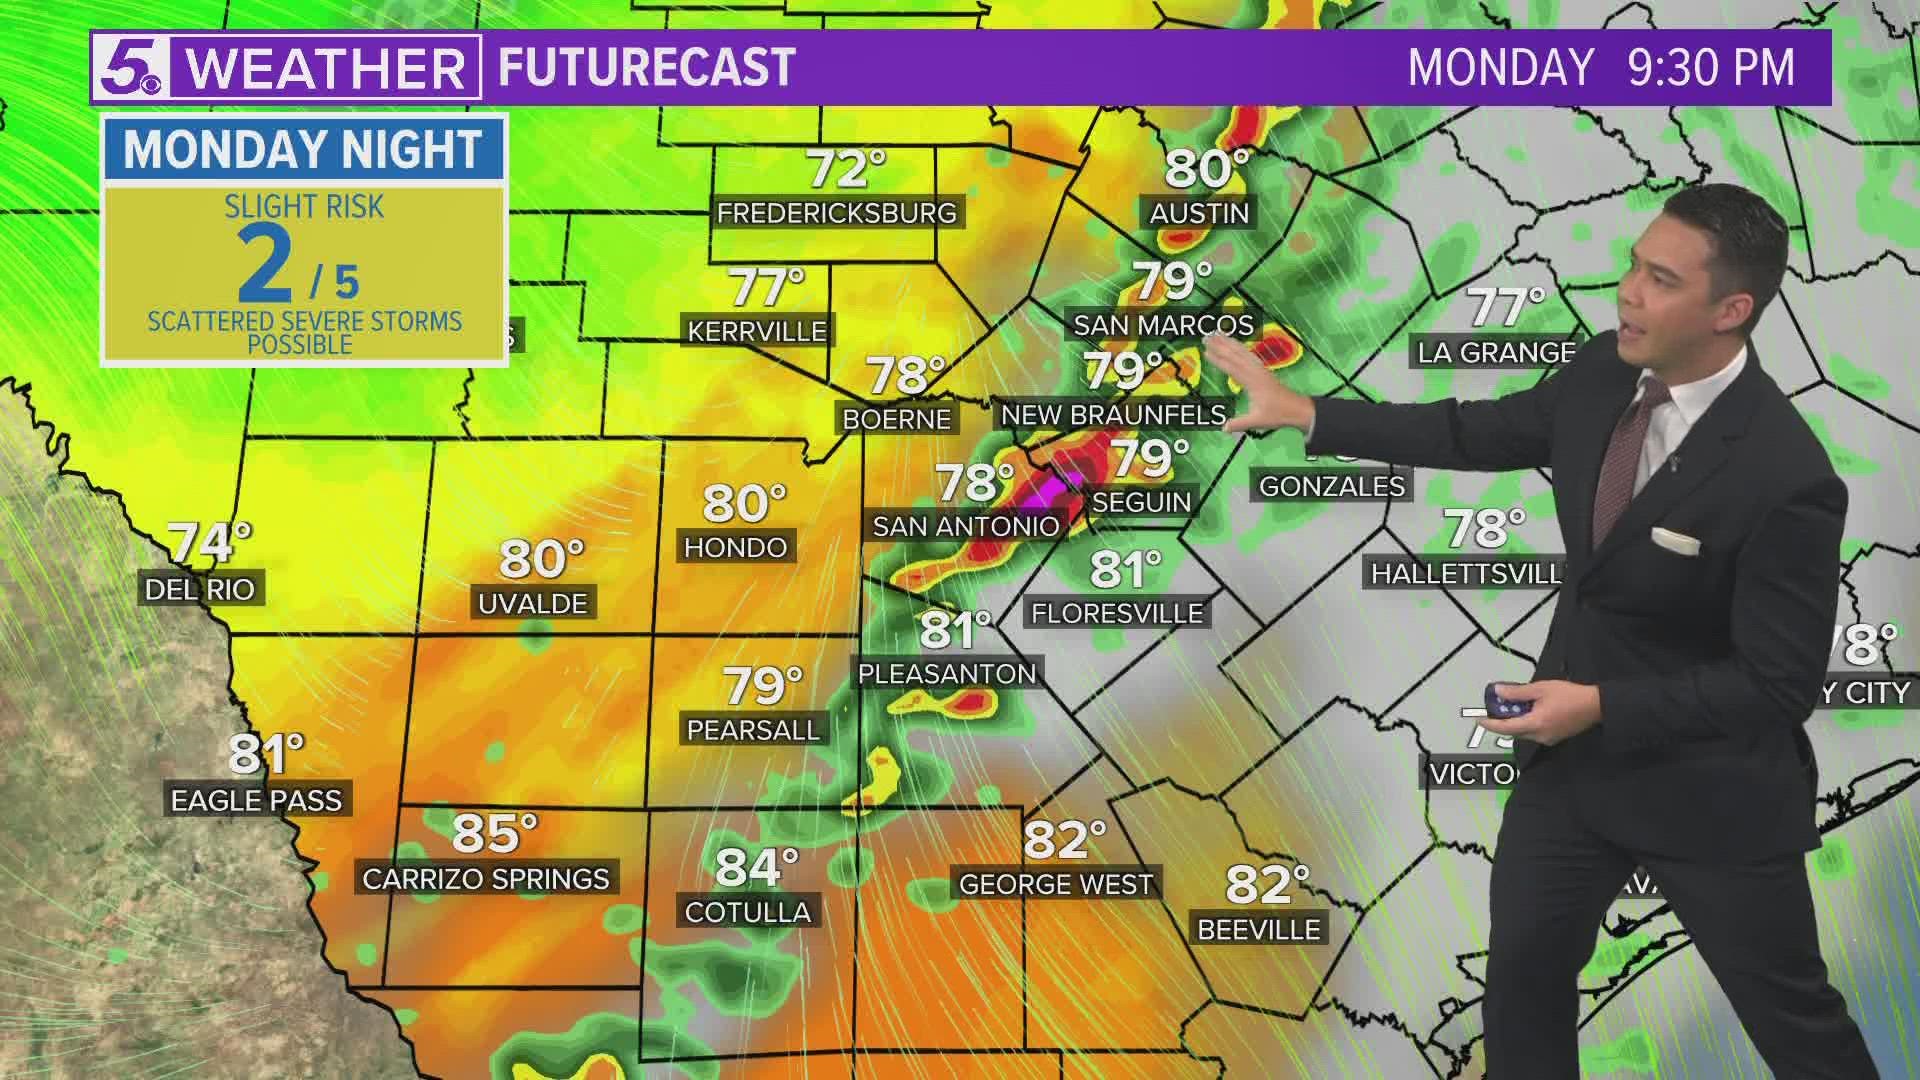 Some isolated pockets could bring strong to severe storms.